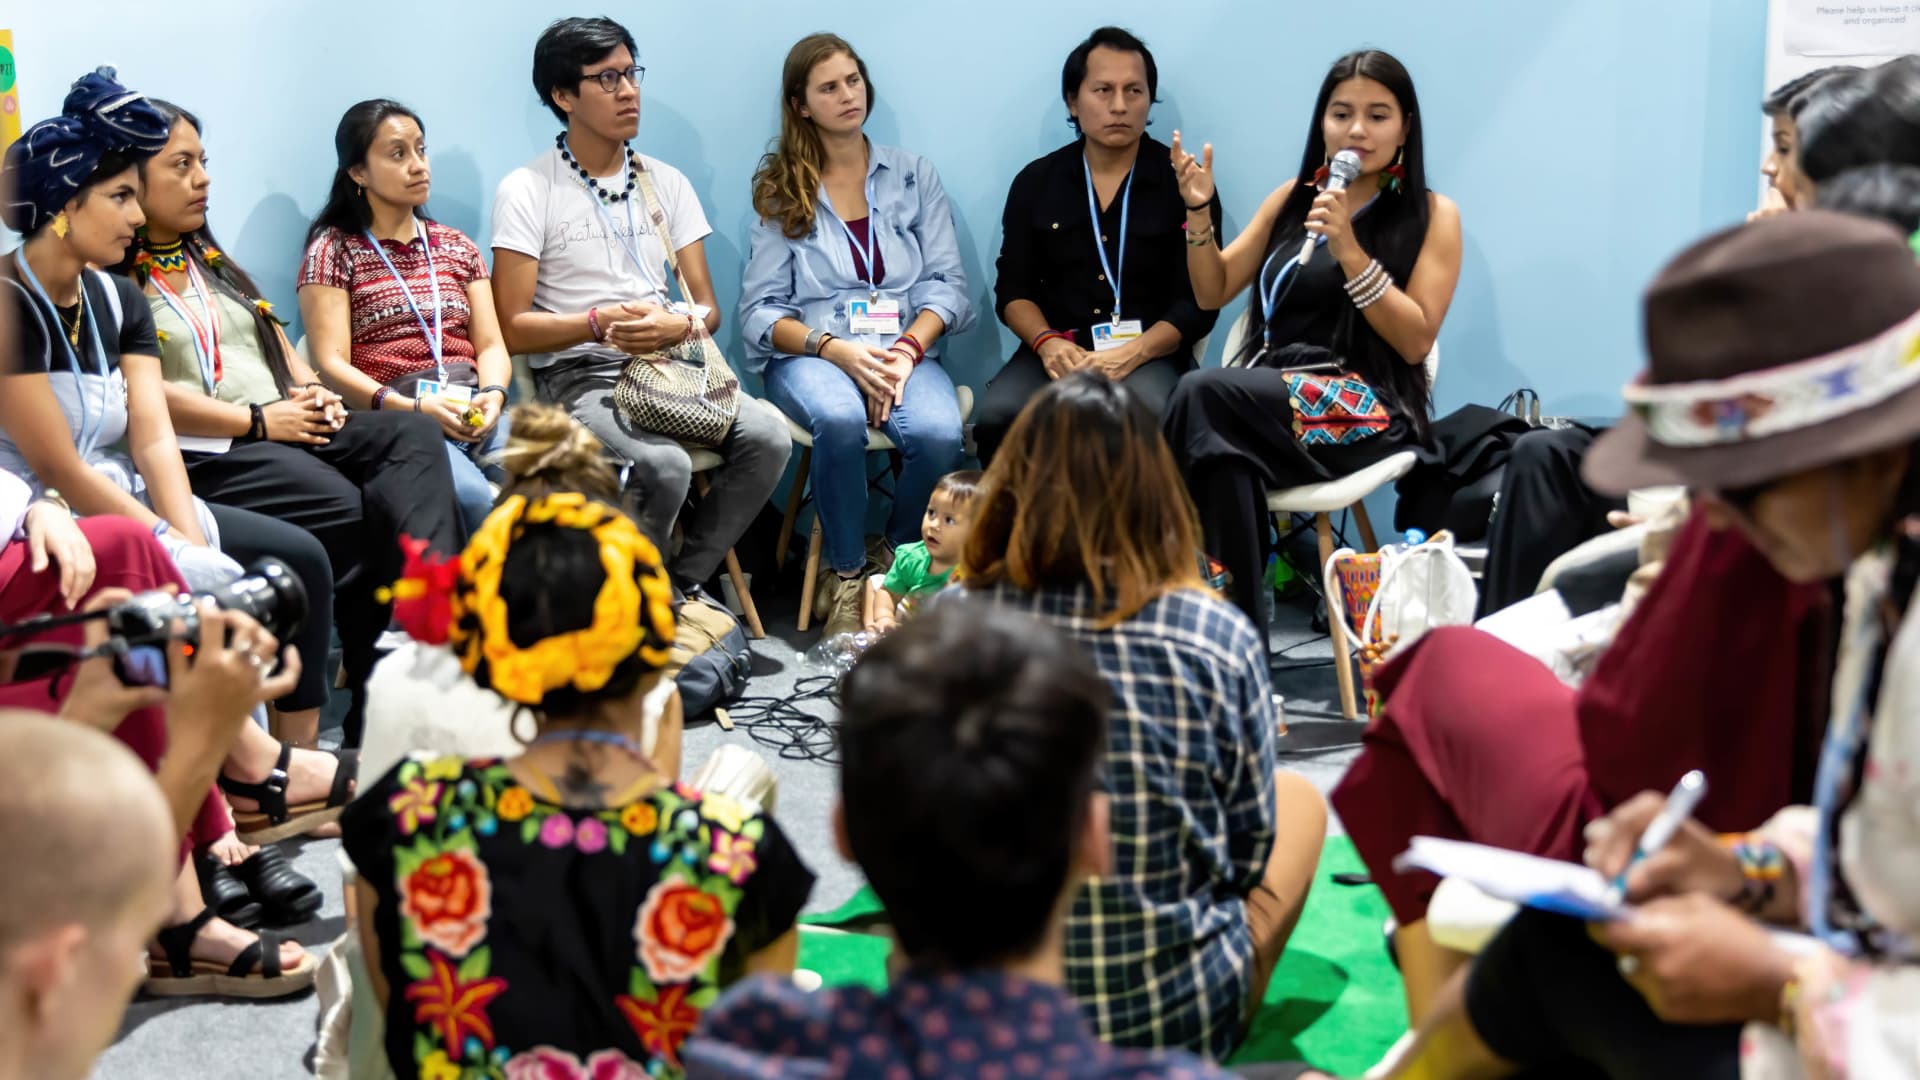 Young participants meet on a discussion panel in Youth and Children Pavilion during the COP27 UN Climate Change Conference.